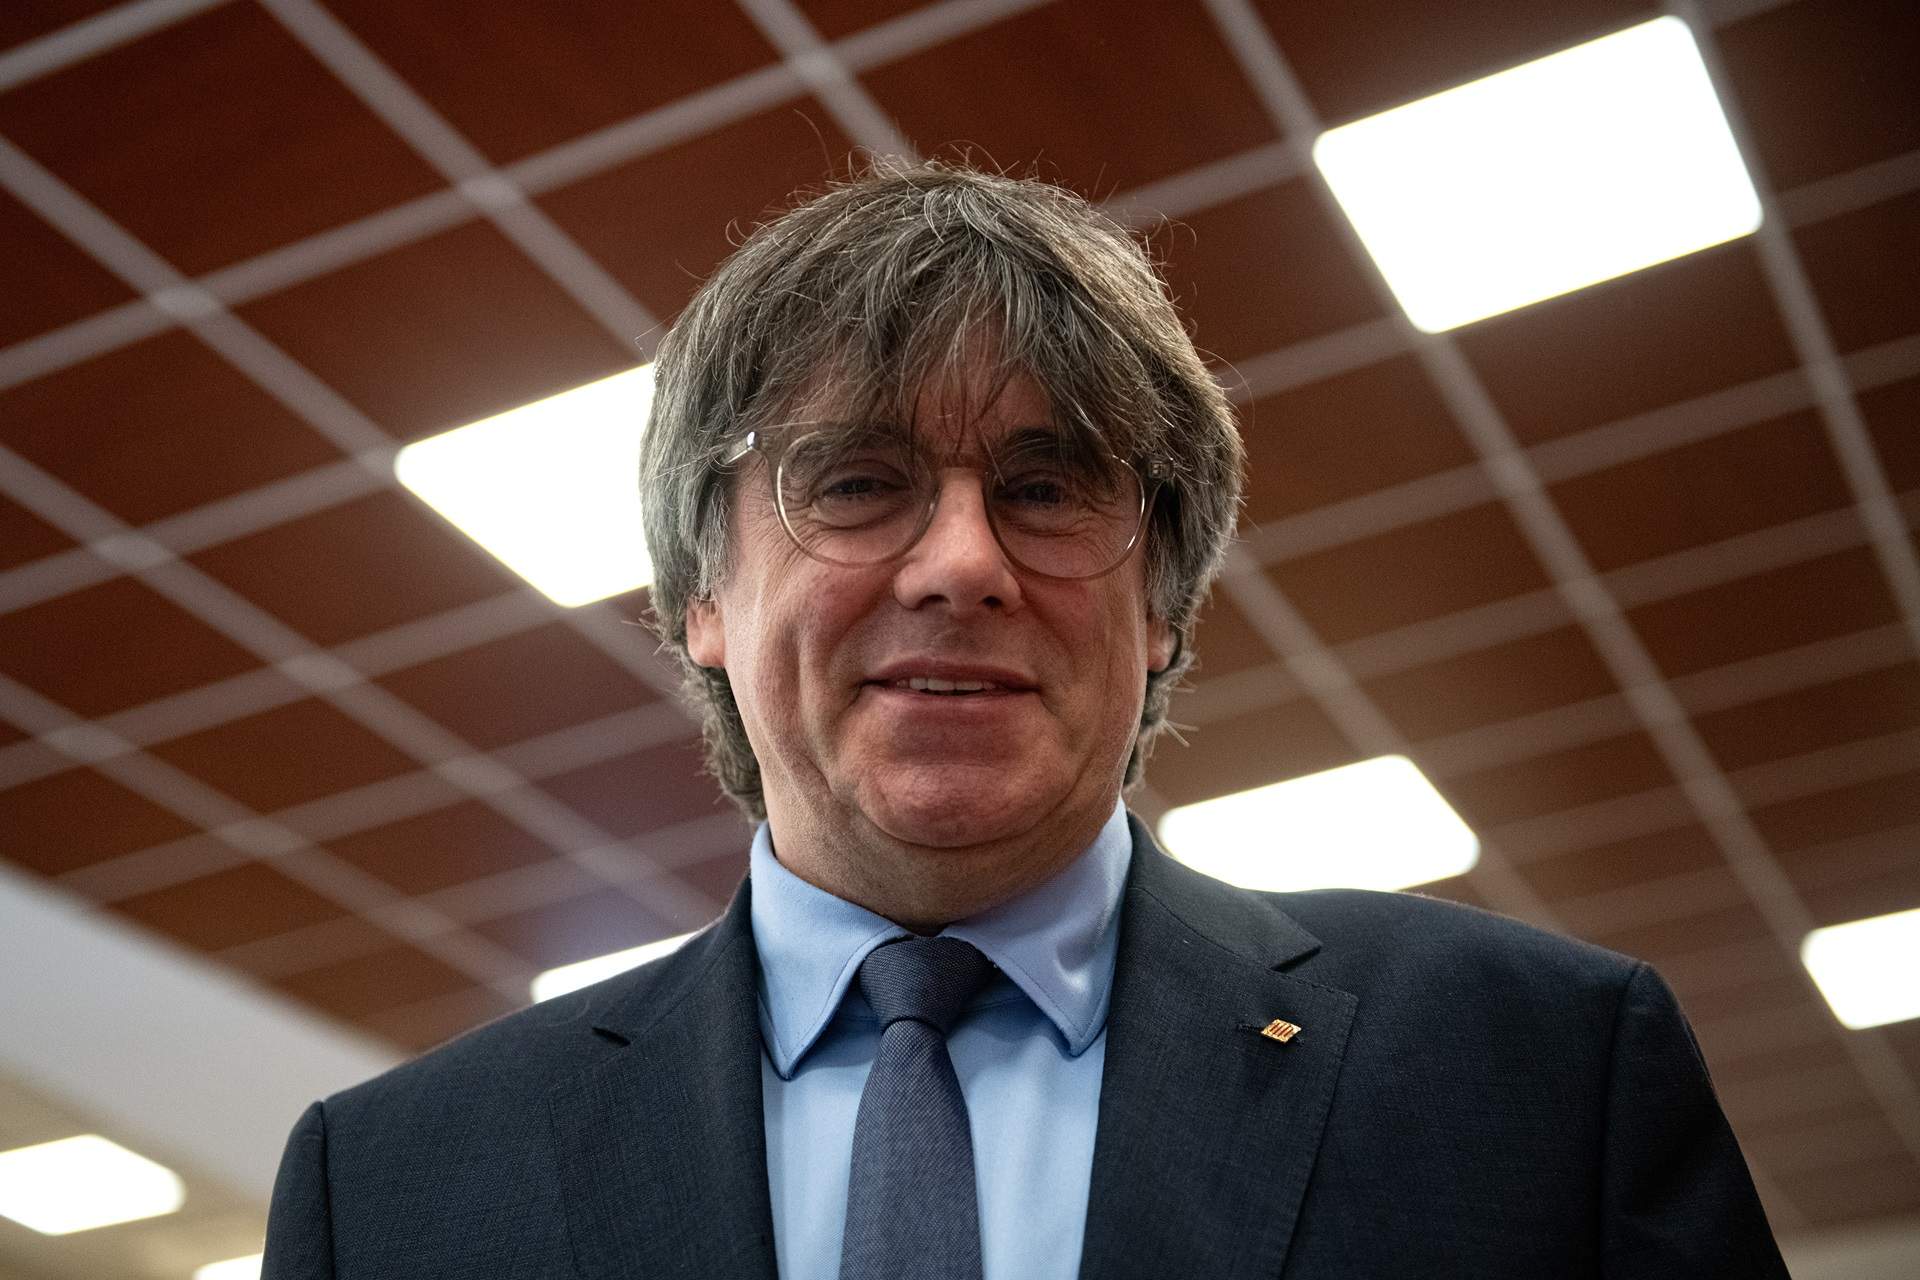 Carles Puigdemont will "probably" announce candidacy for Catalan presidency next week